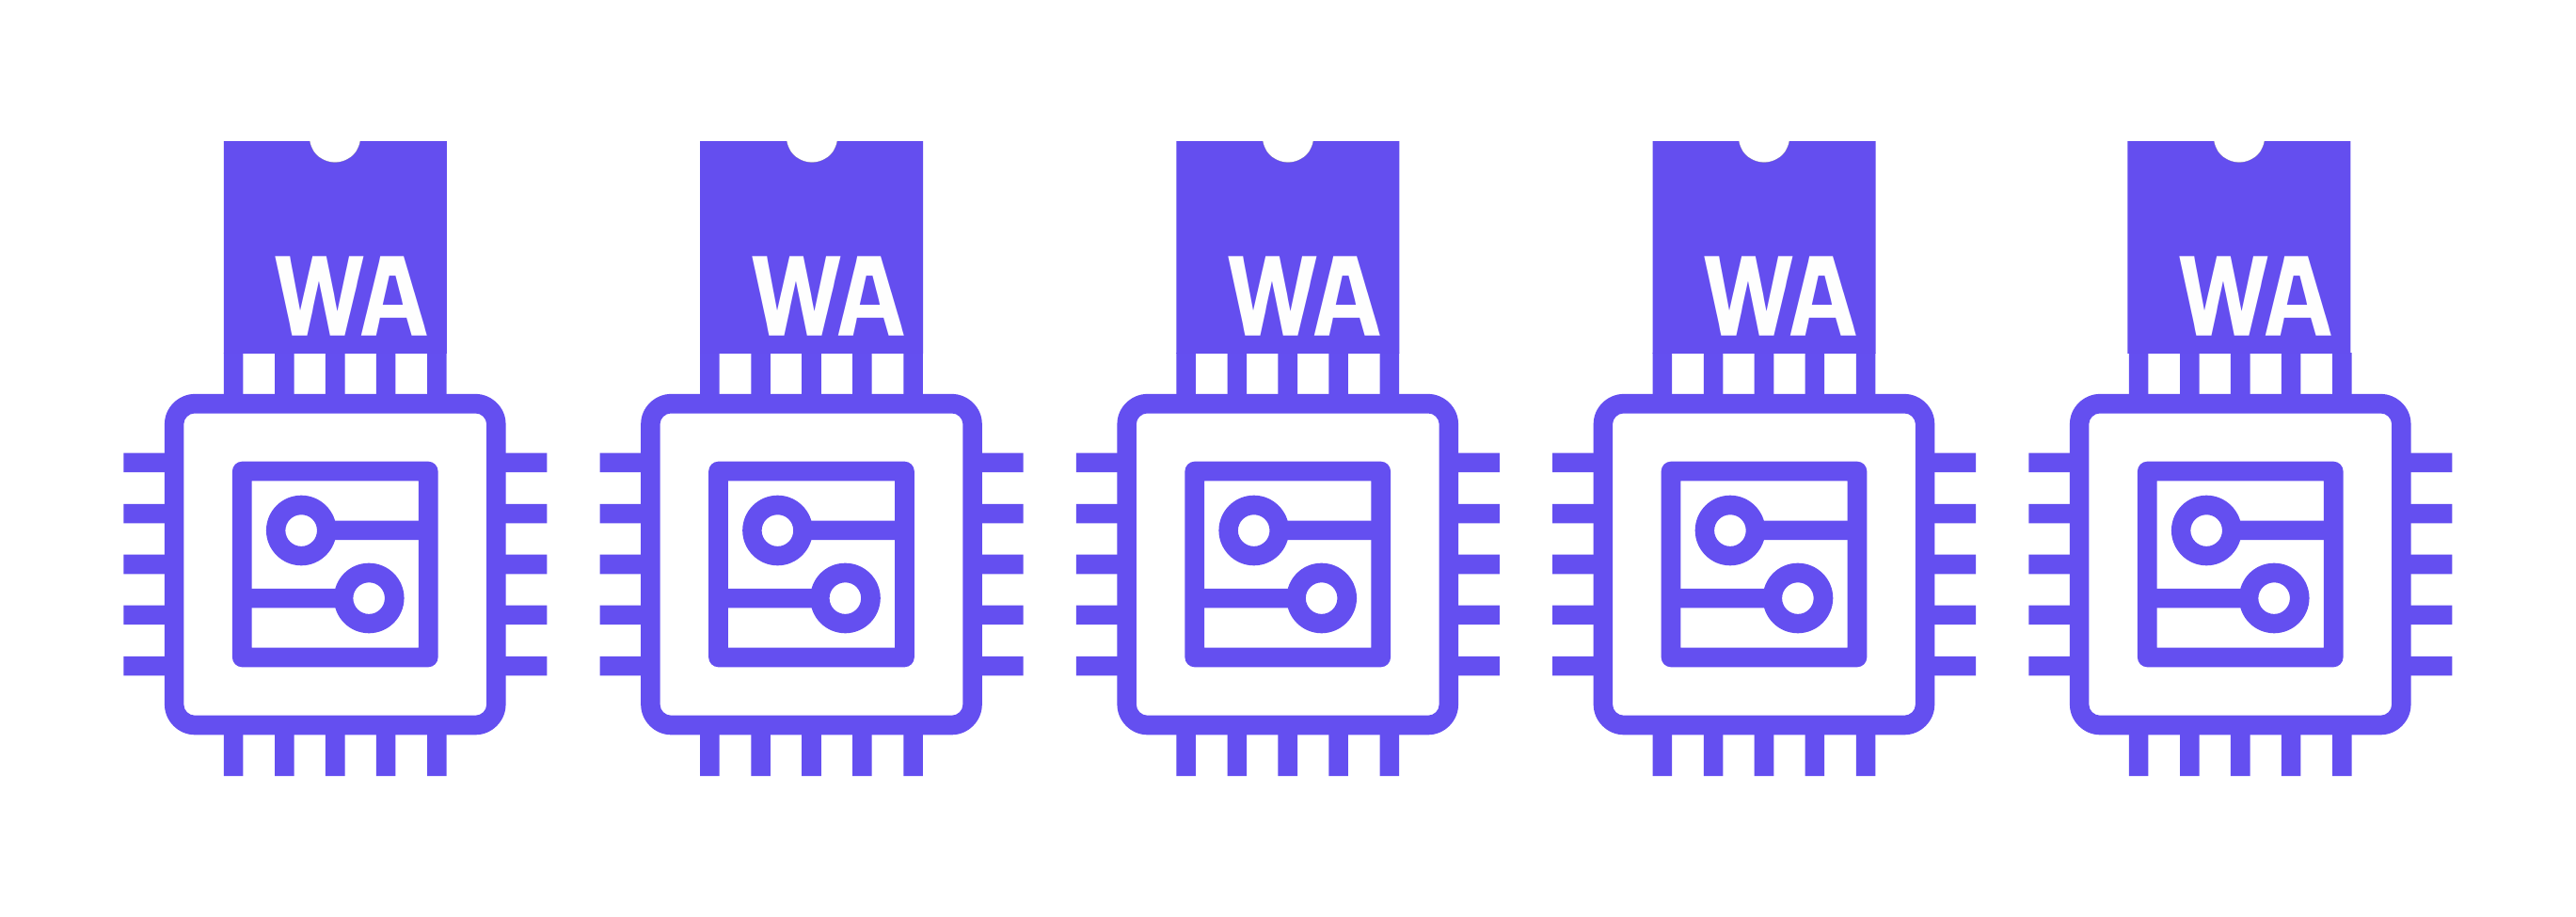 WebAssembly at the IoT Edge: A Motivating Example